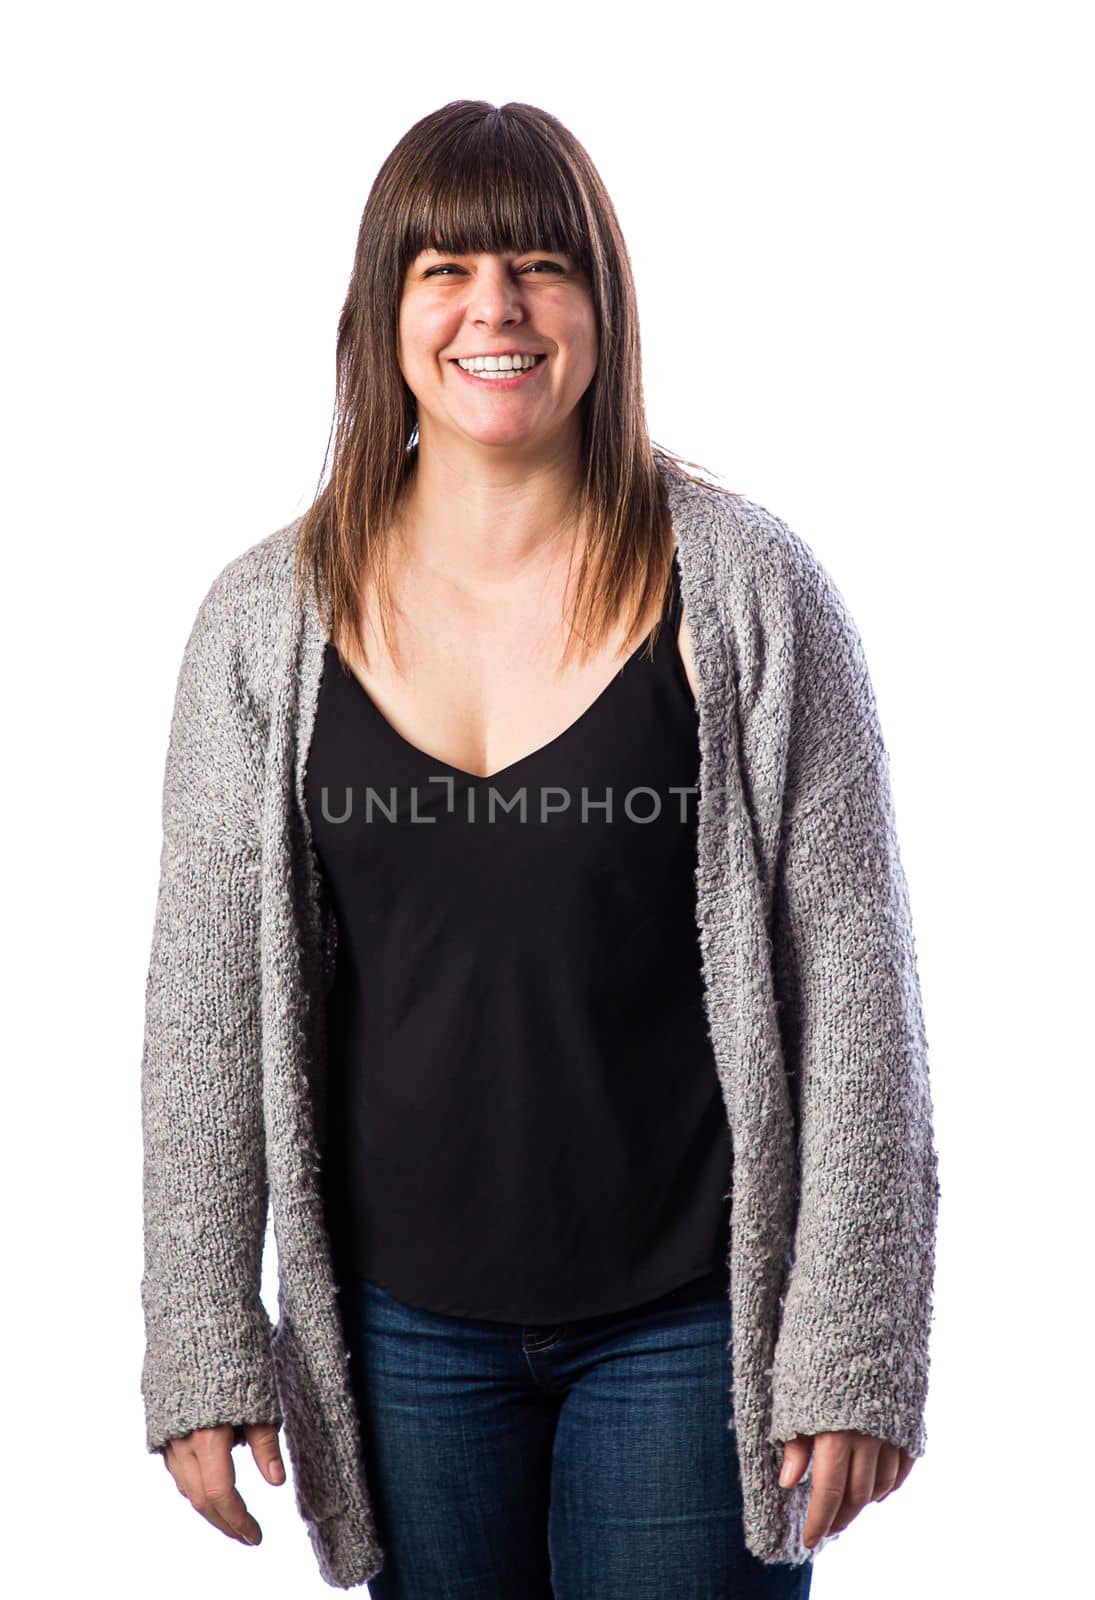 Isolated portrait of a forty year old woman, wearing a gray vest, with a great big smile